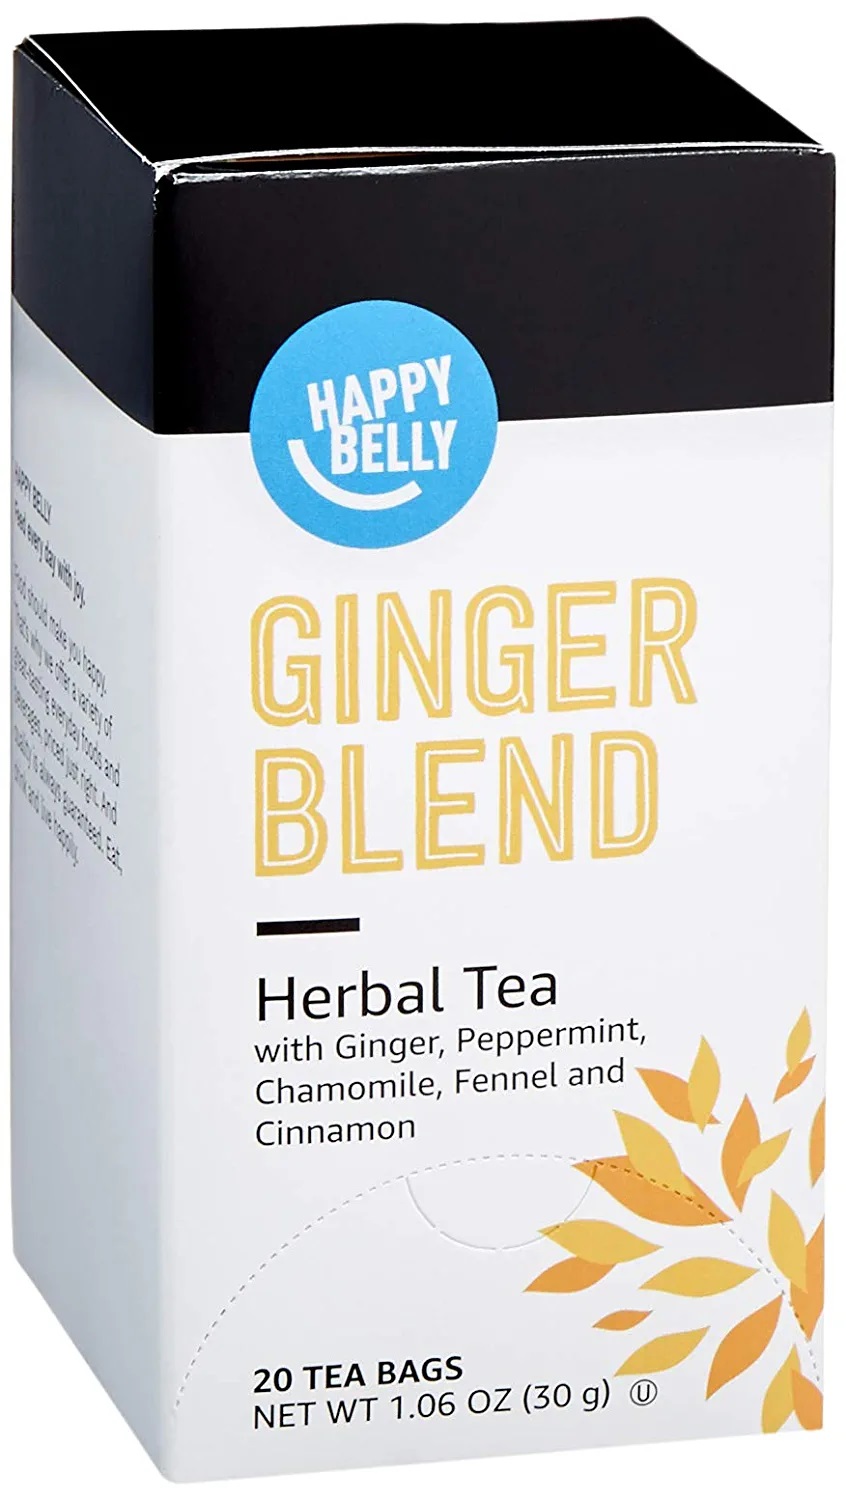 Amazon Brand - Happy Belly Ginger Herbal Tea Bags, 20 Count w/subscribe and save couponn $1.91 YMMV